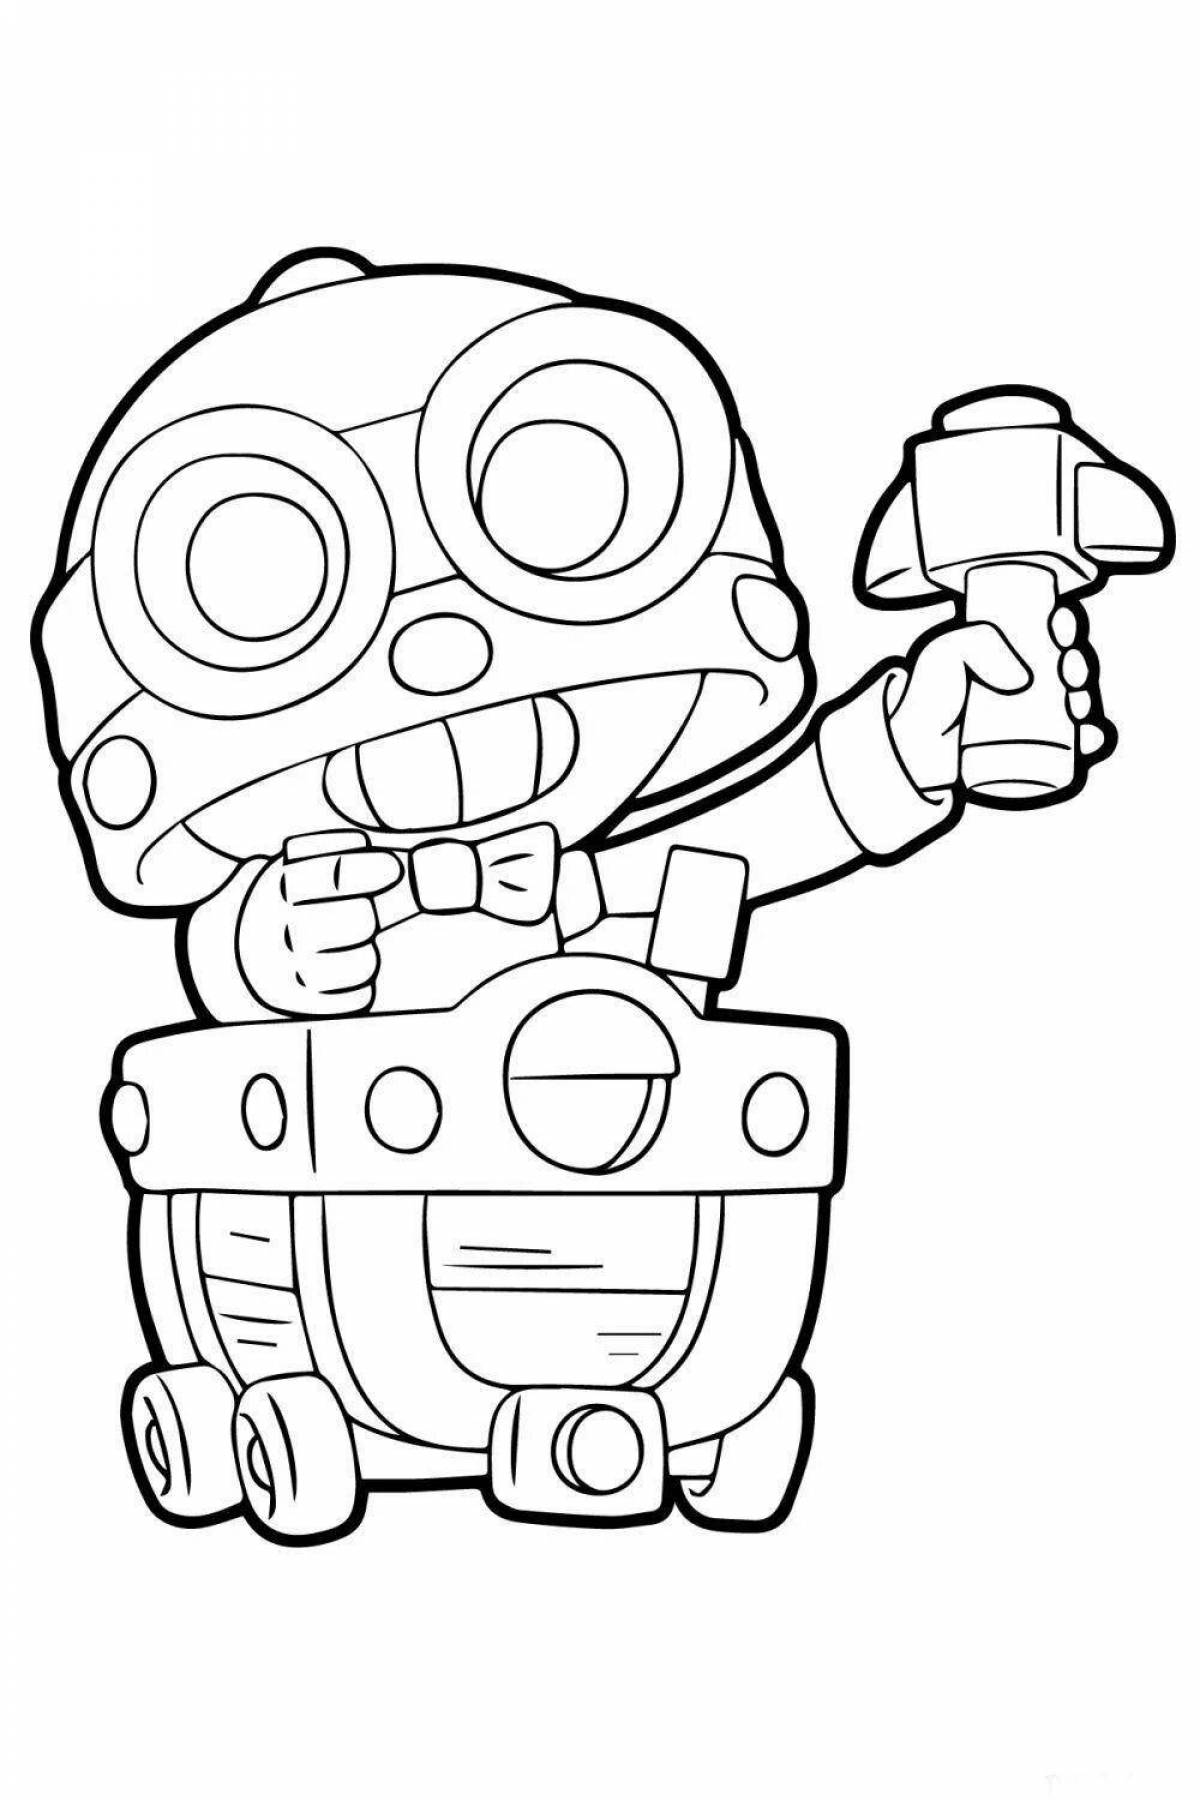 Bravo stars exciting new coloring page